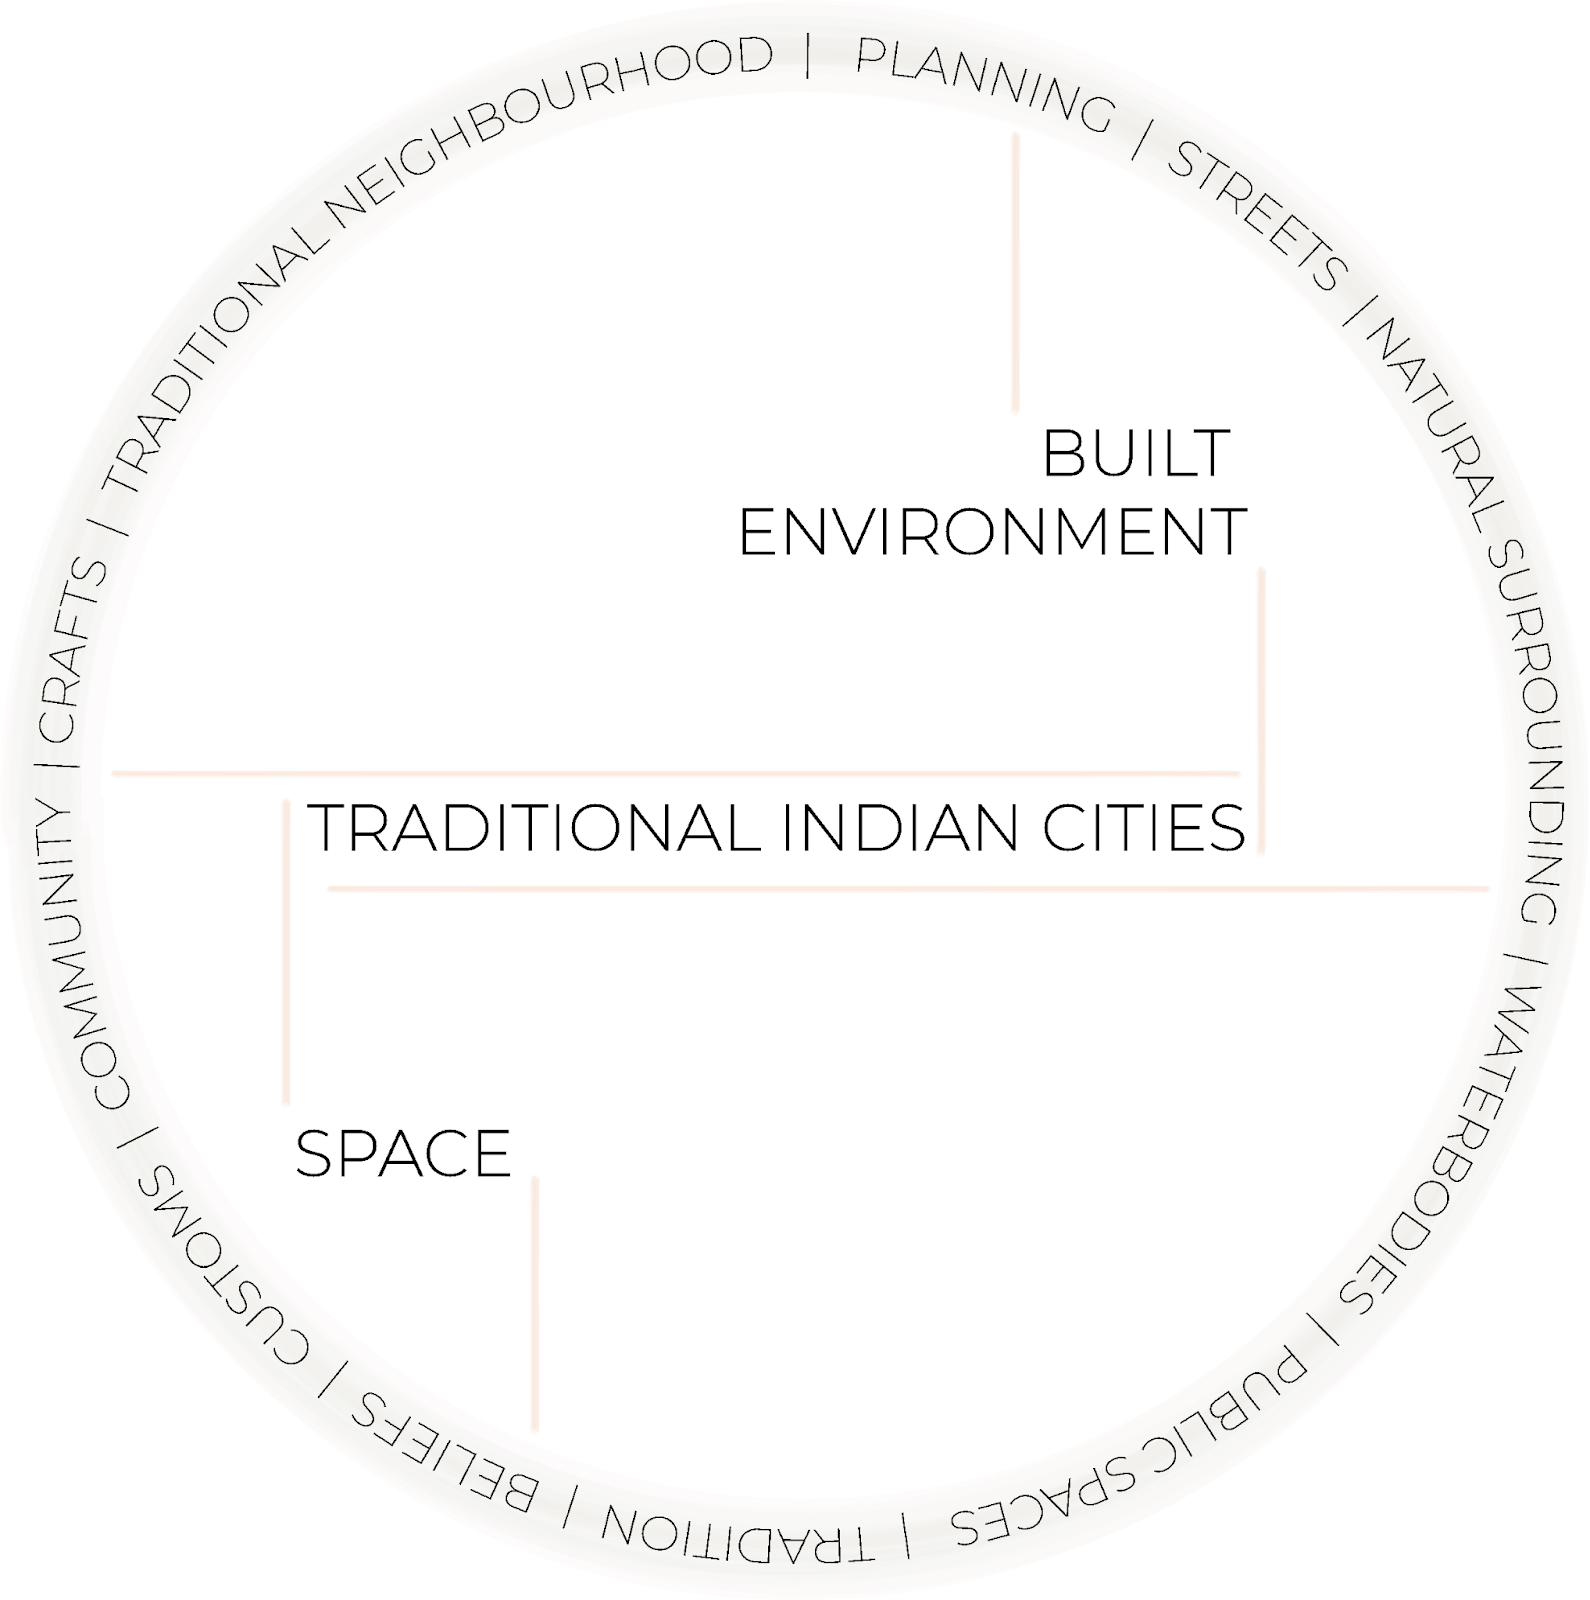 Chart of imagination, articulation and evolution of use of space and built environment in traditional Indian cities